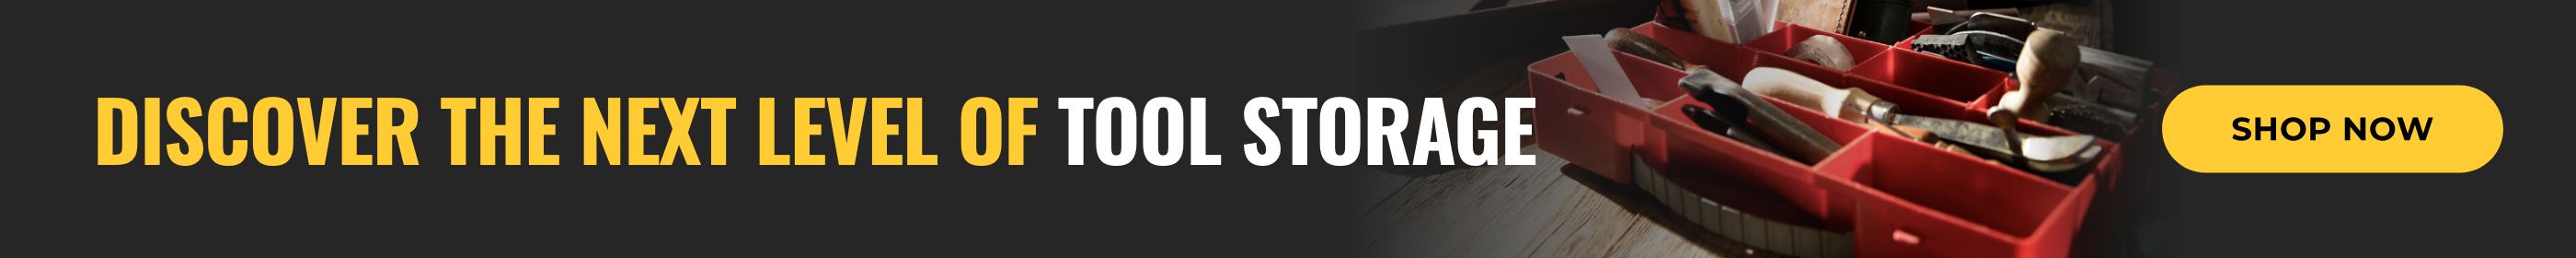 Discover the Next Level of Tool Storage